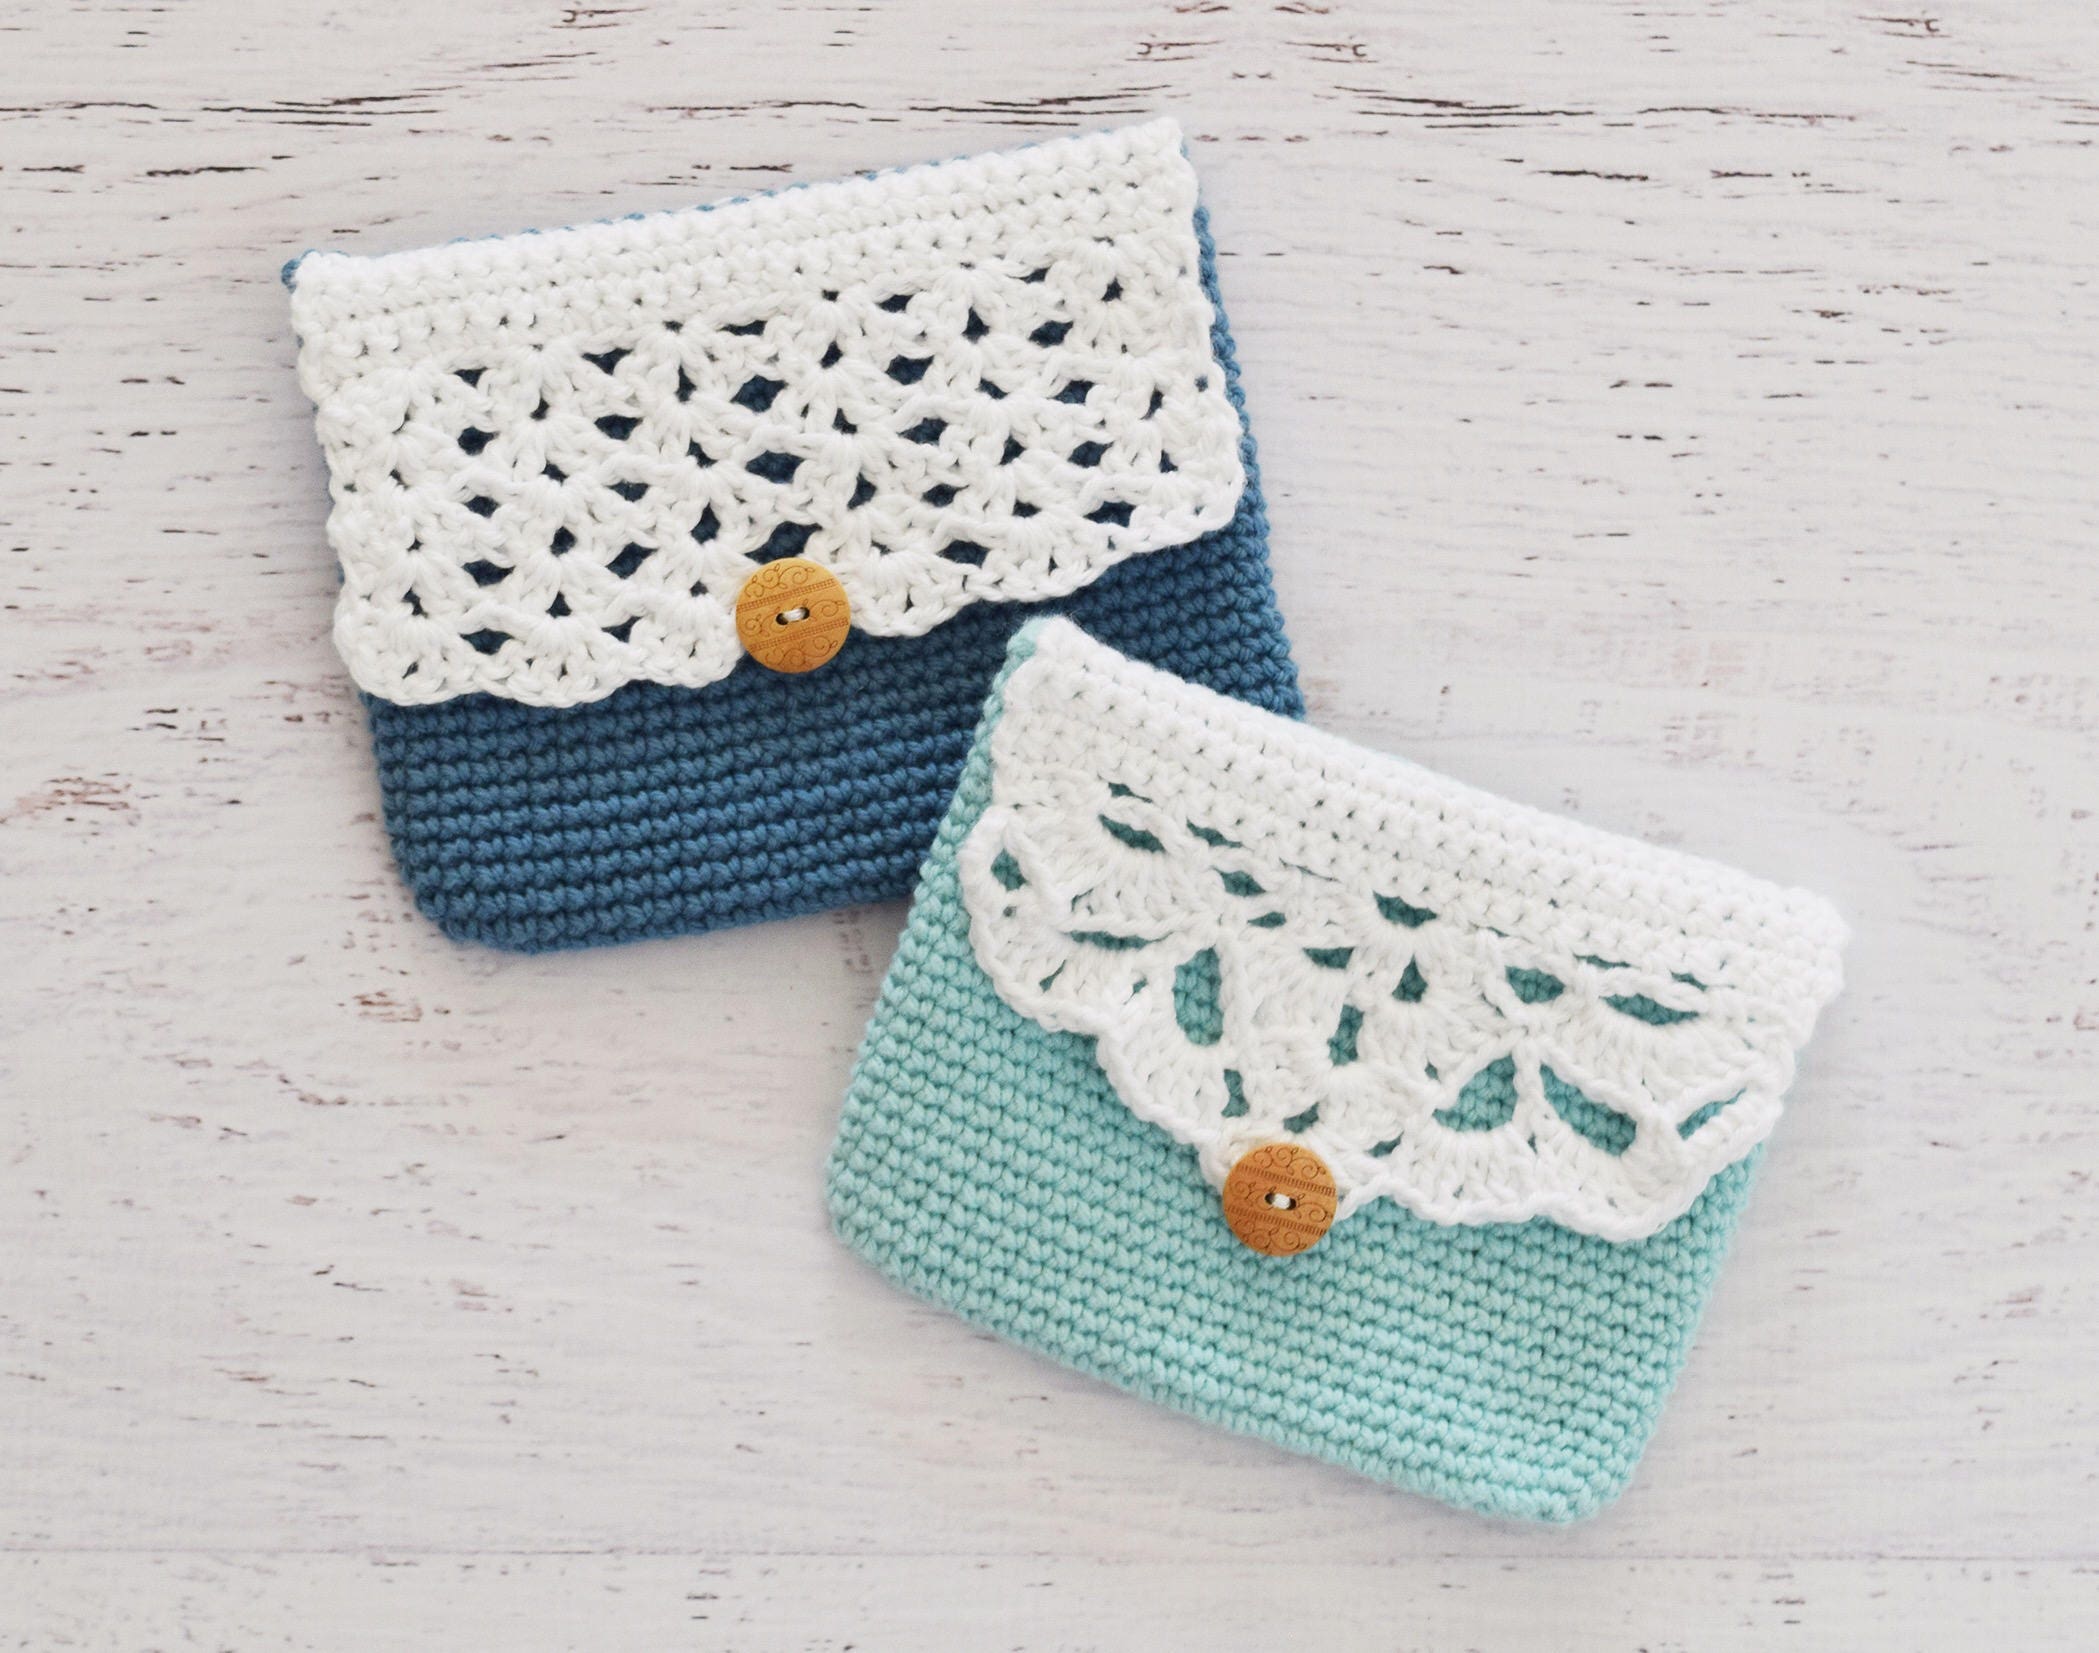 Small Crochet Pouch Pattern – Stitching Together